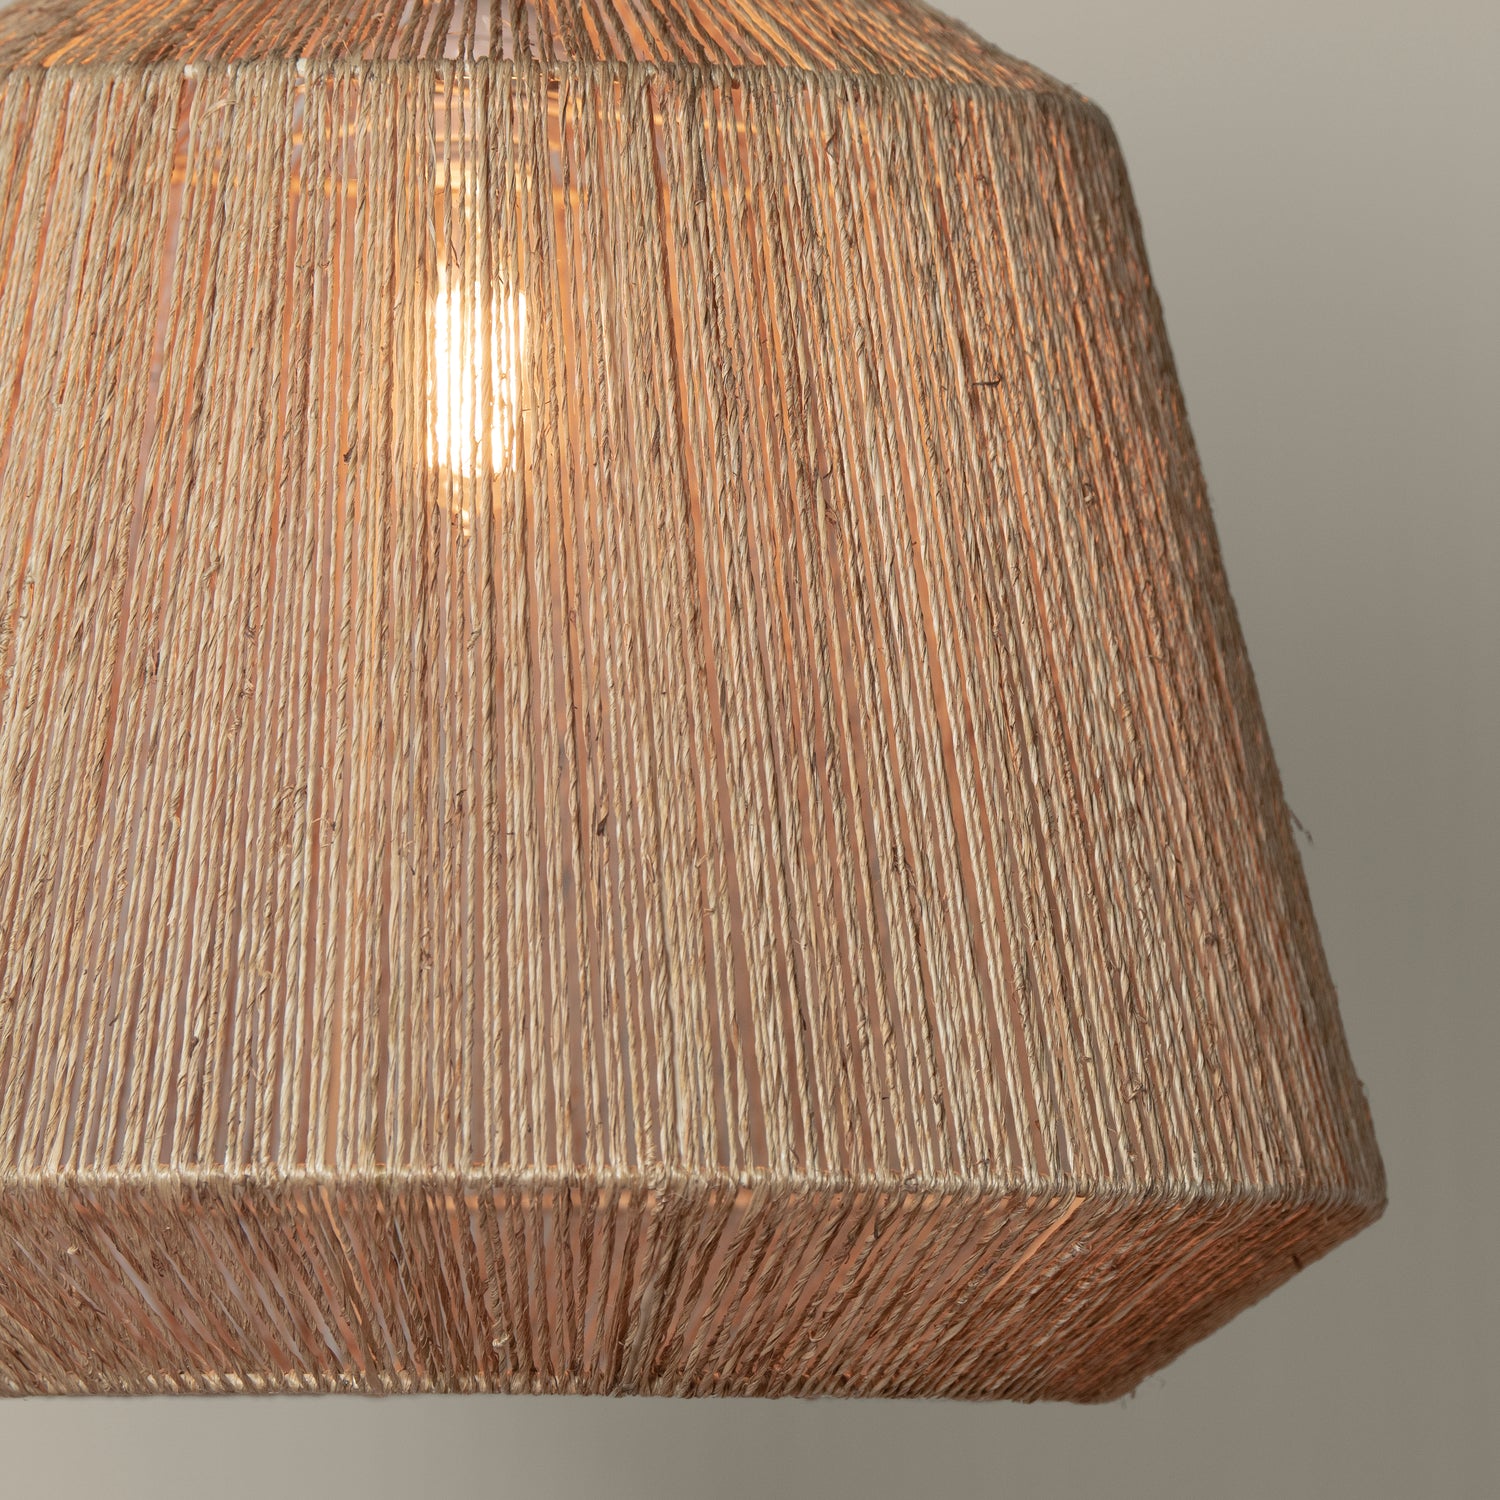 manhattan jute pendant in natural with light on detail